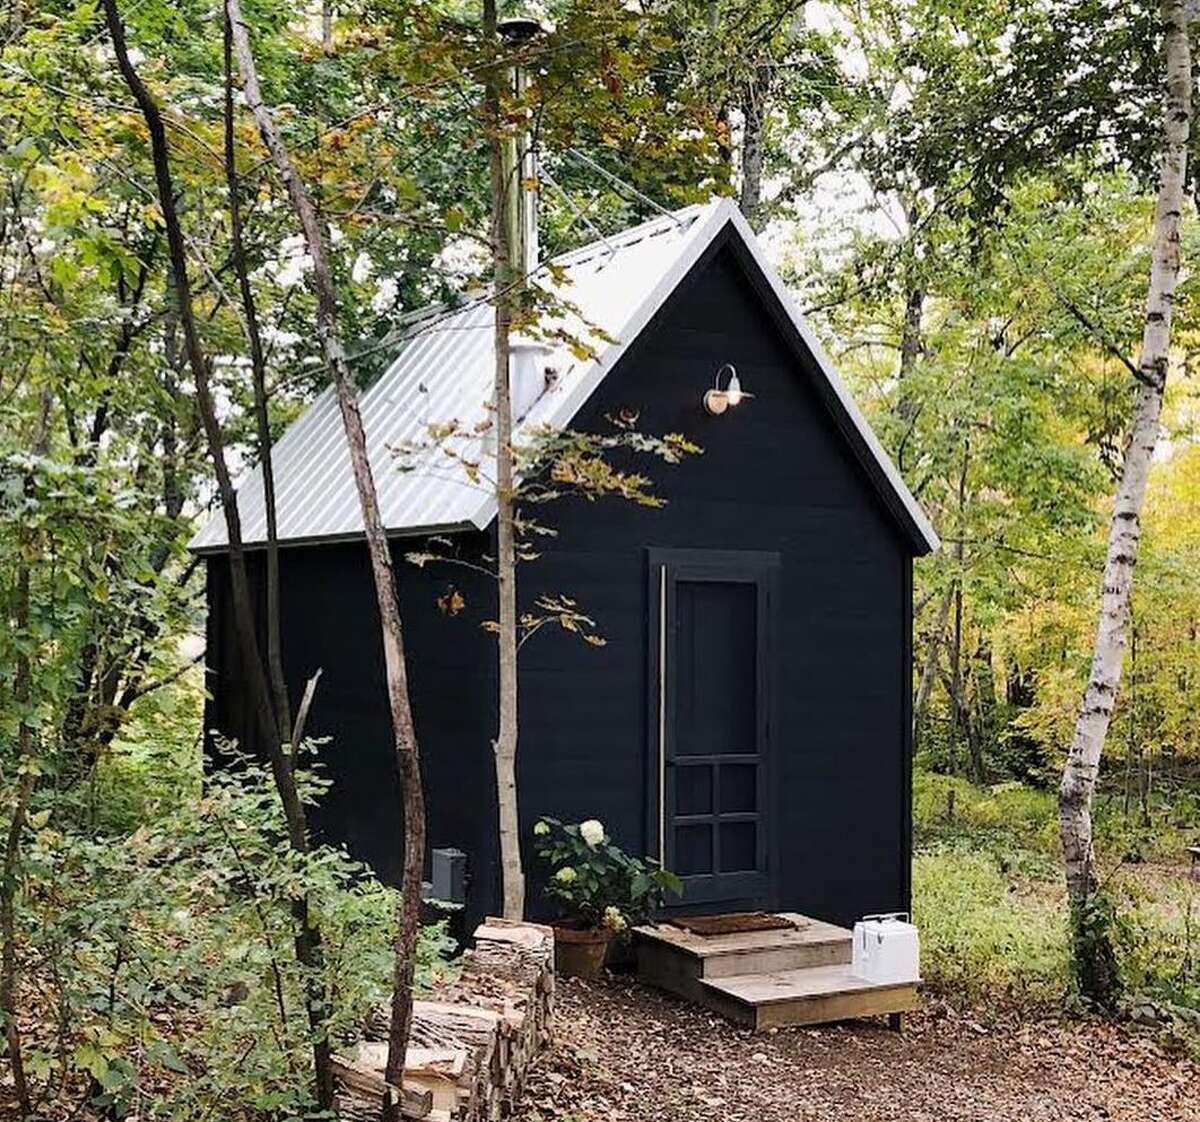 The Lost Kitchen in Maine, a popular restaurant with a cult following, sources its food locally, but the décor for its new on-site cabins comes from Hudson Valley design store Hammertown.